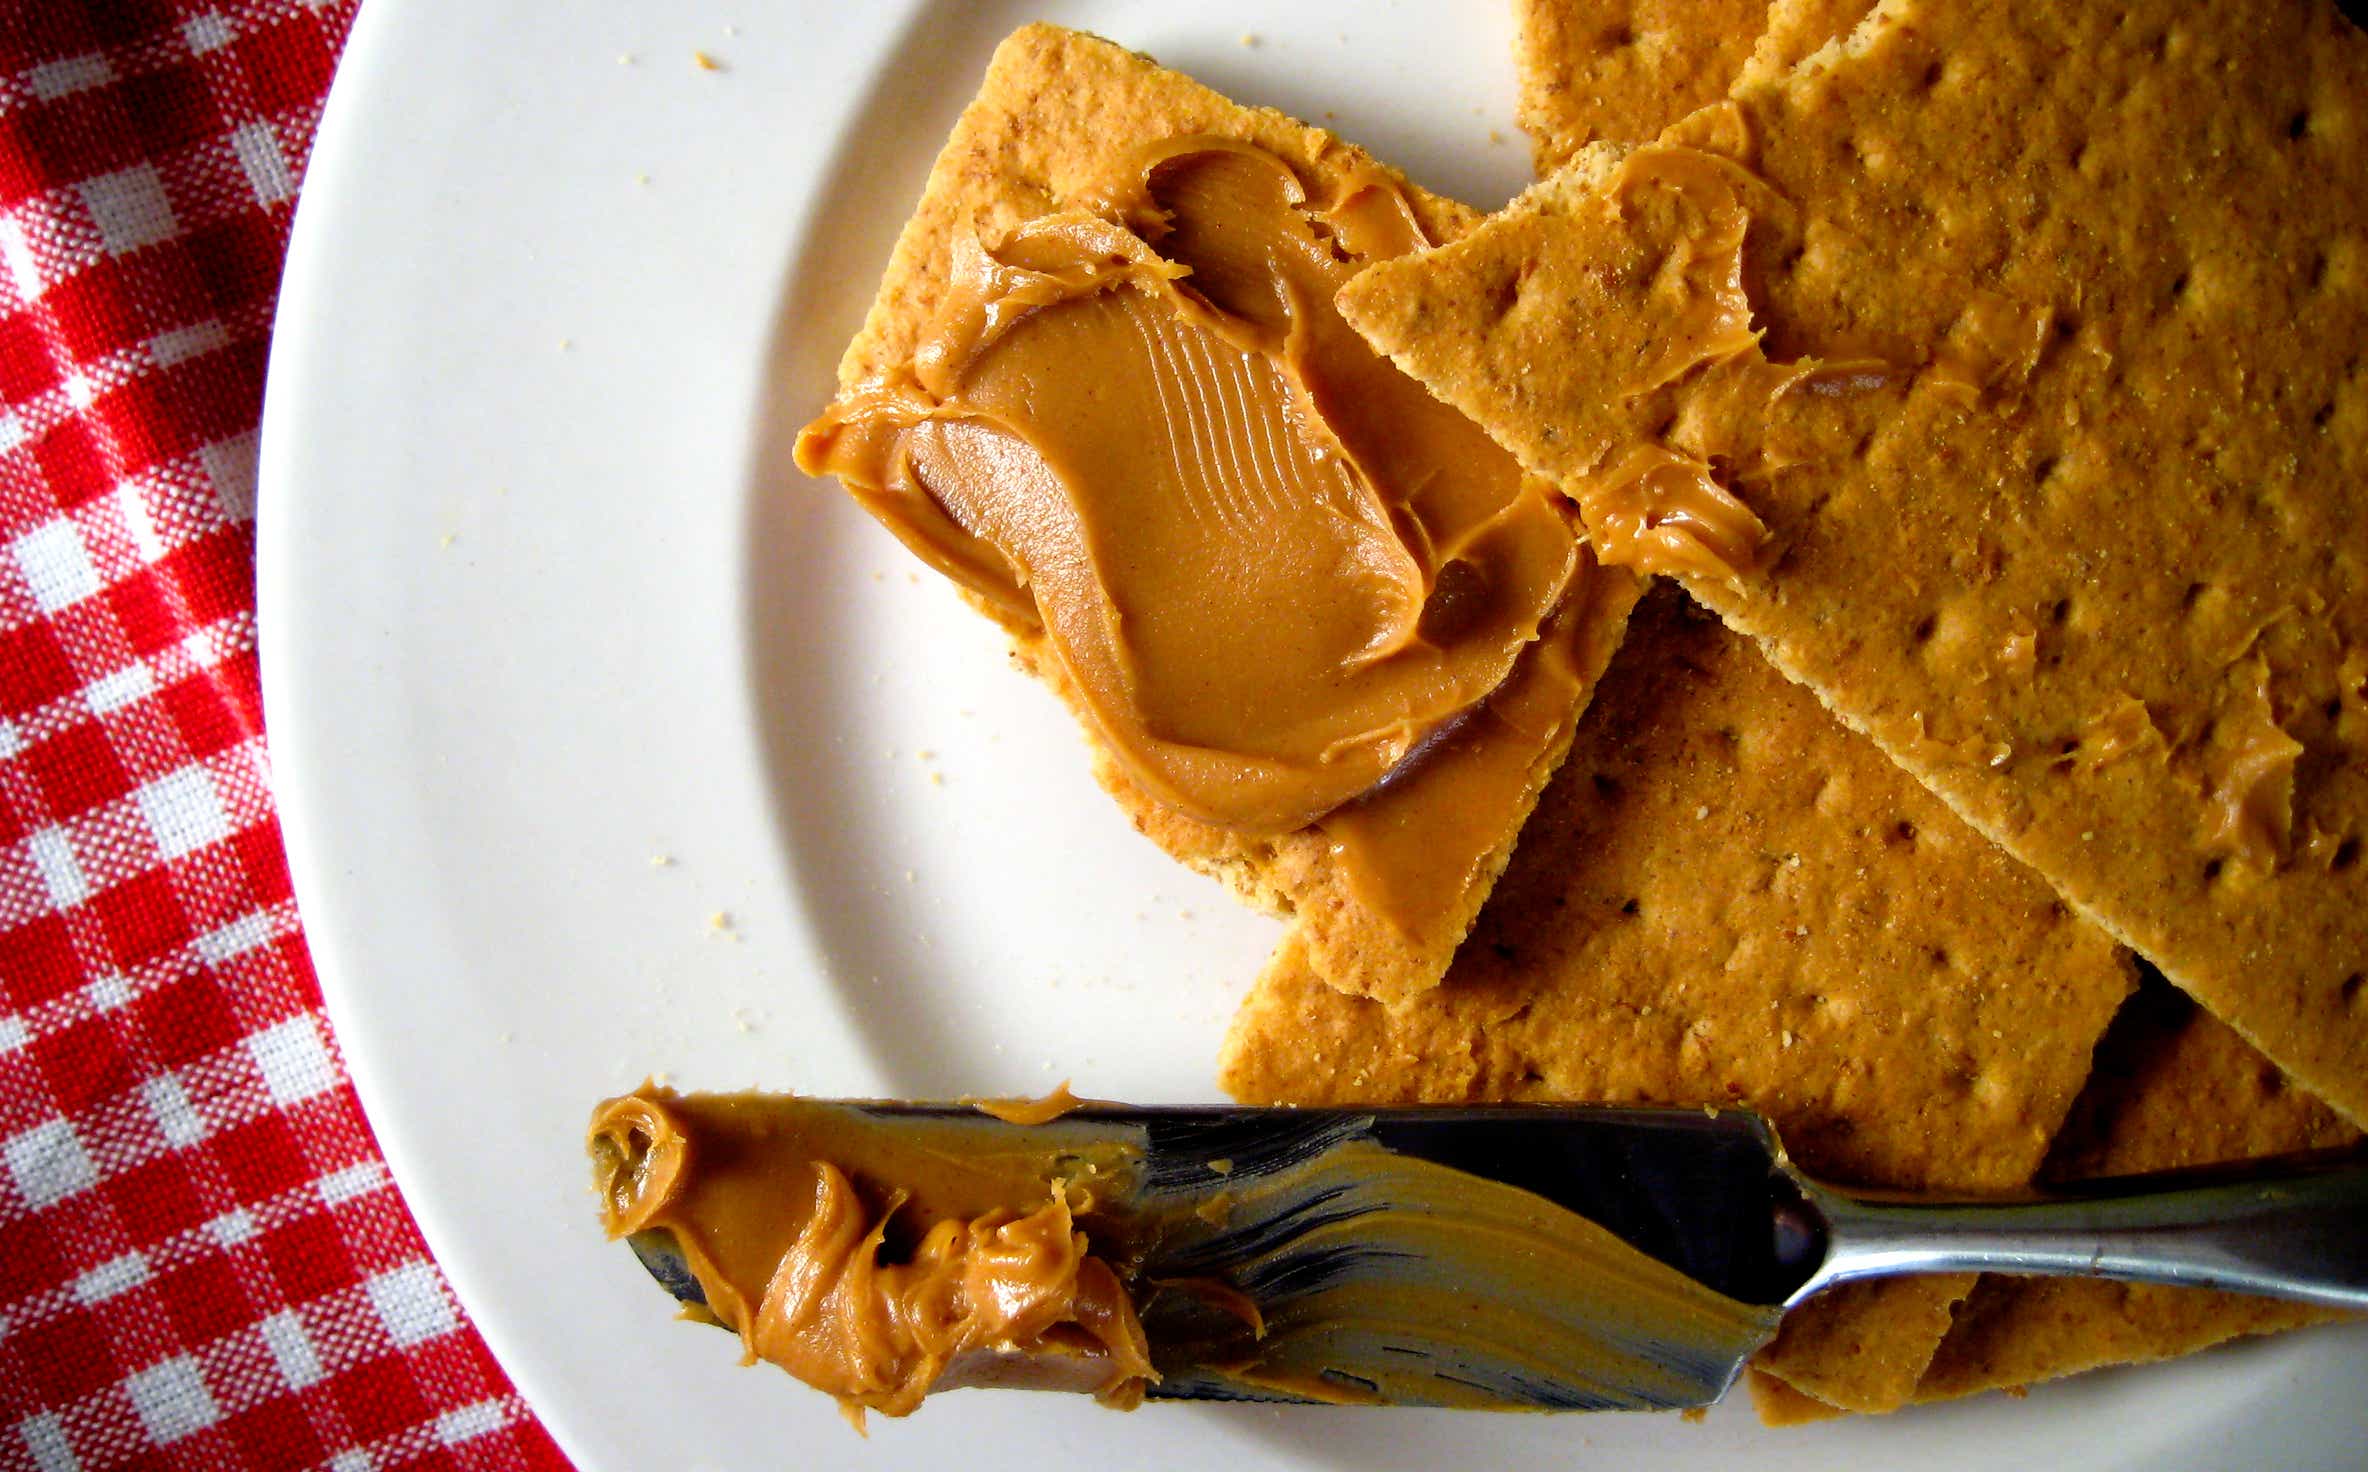 Peanut butter and graham crackers on red background